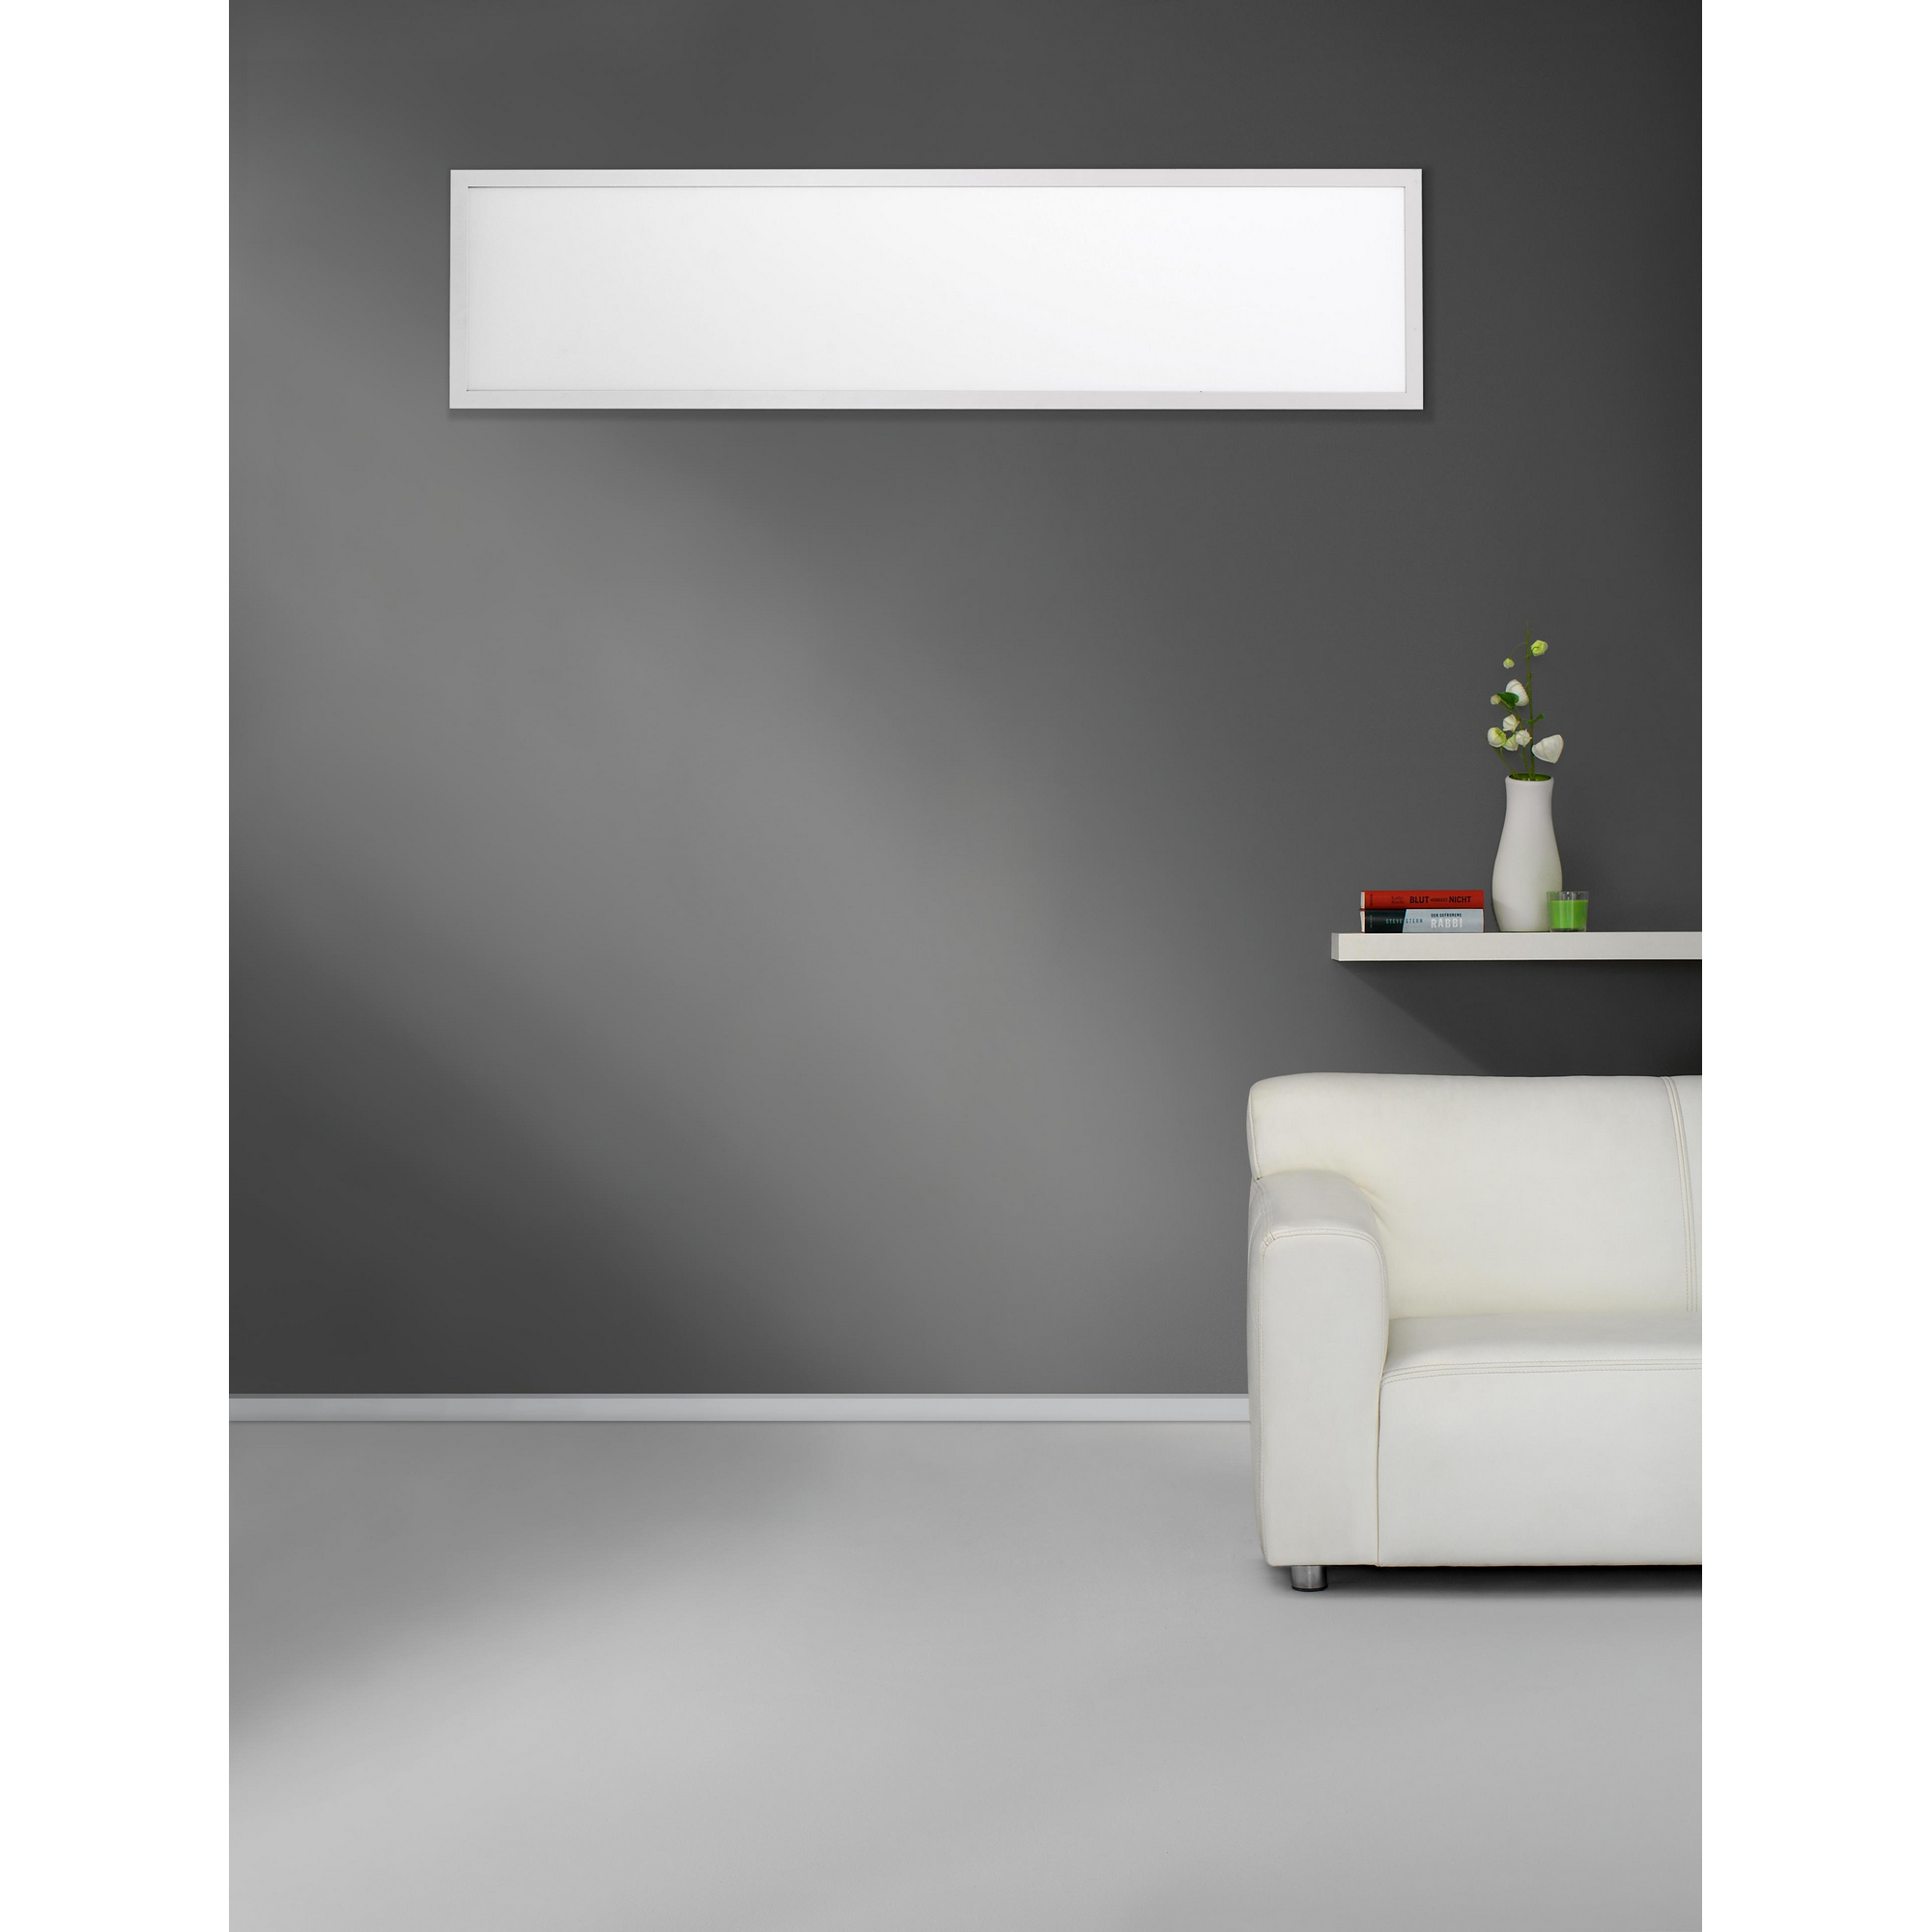 LED-Panel 'Lara' weiß 29,5 x 119,5 cm 4300 lm + product picture